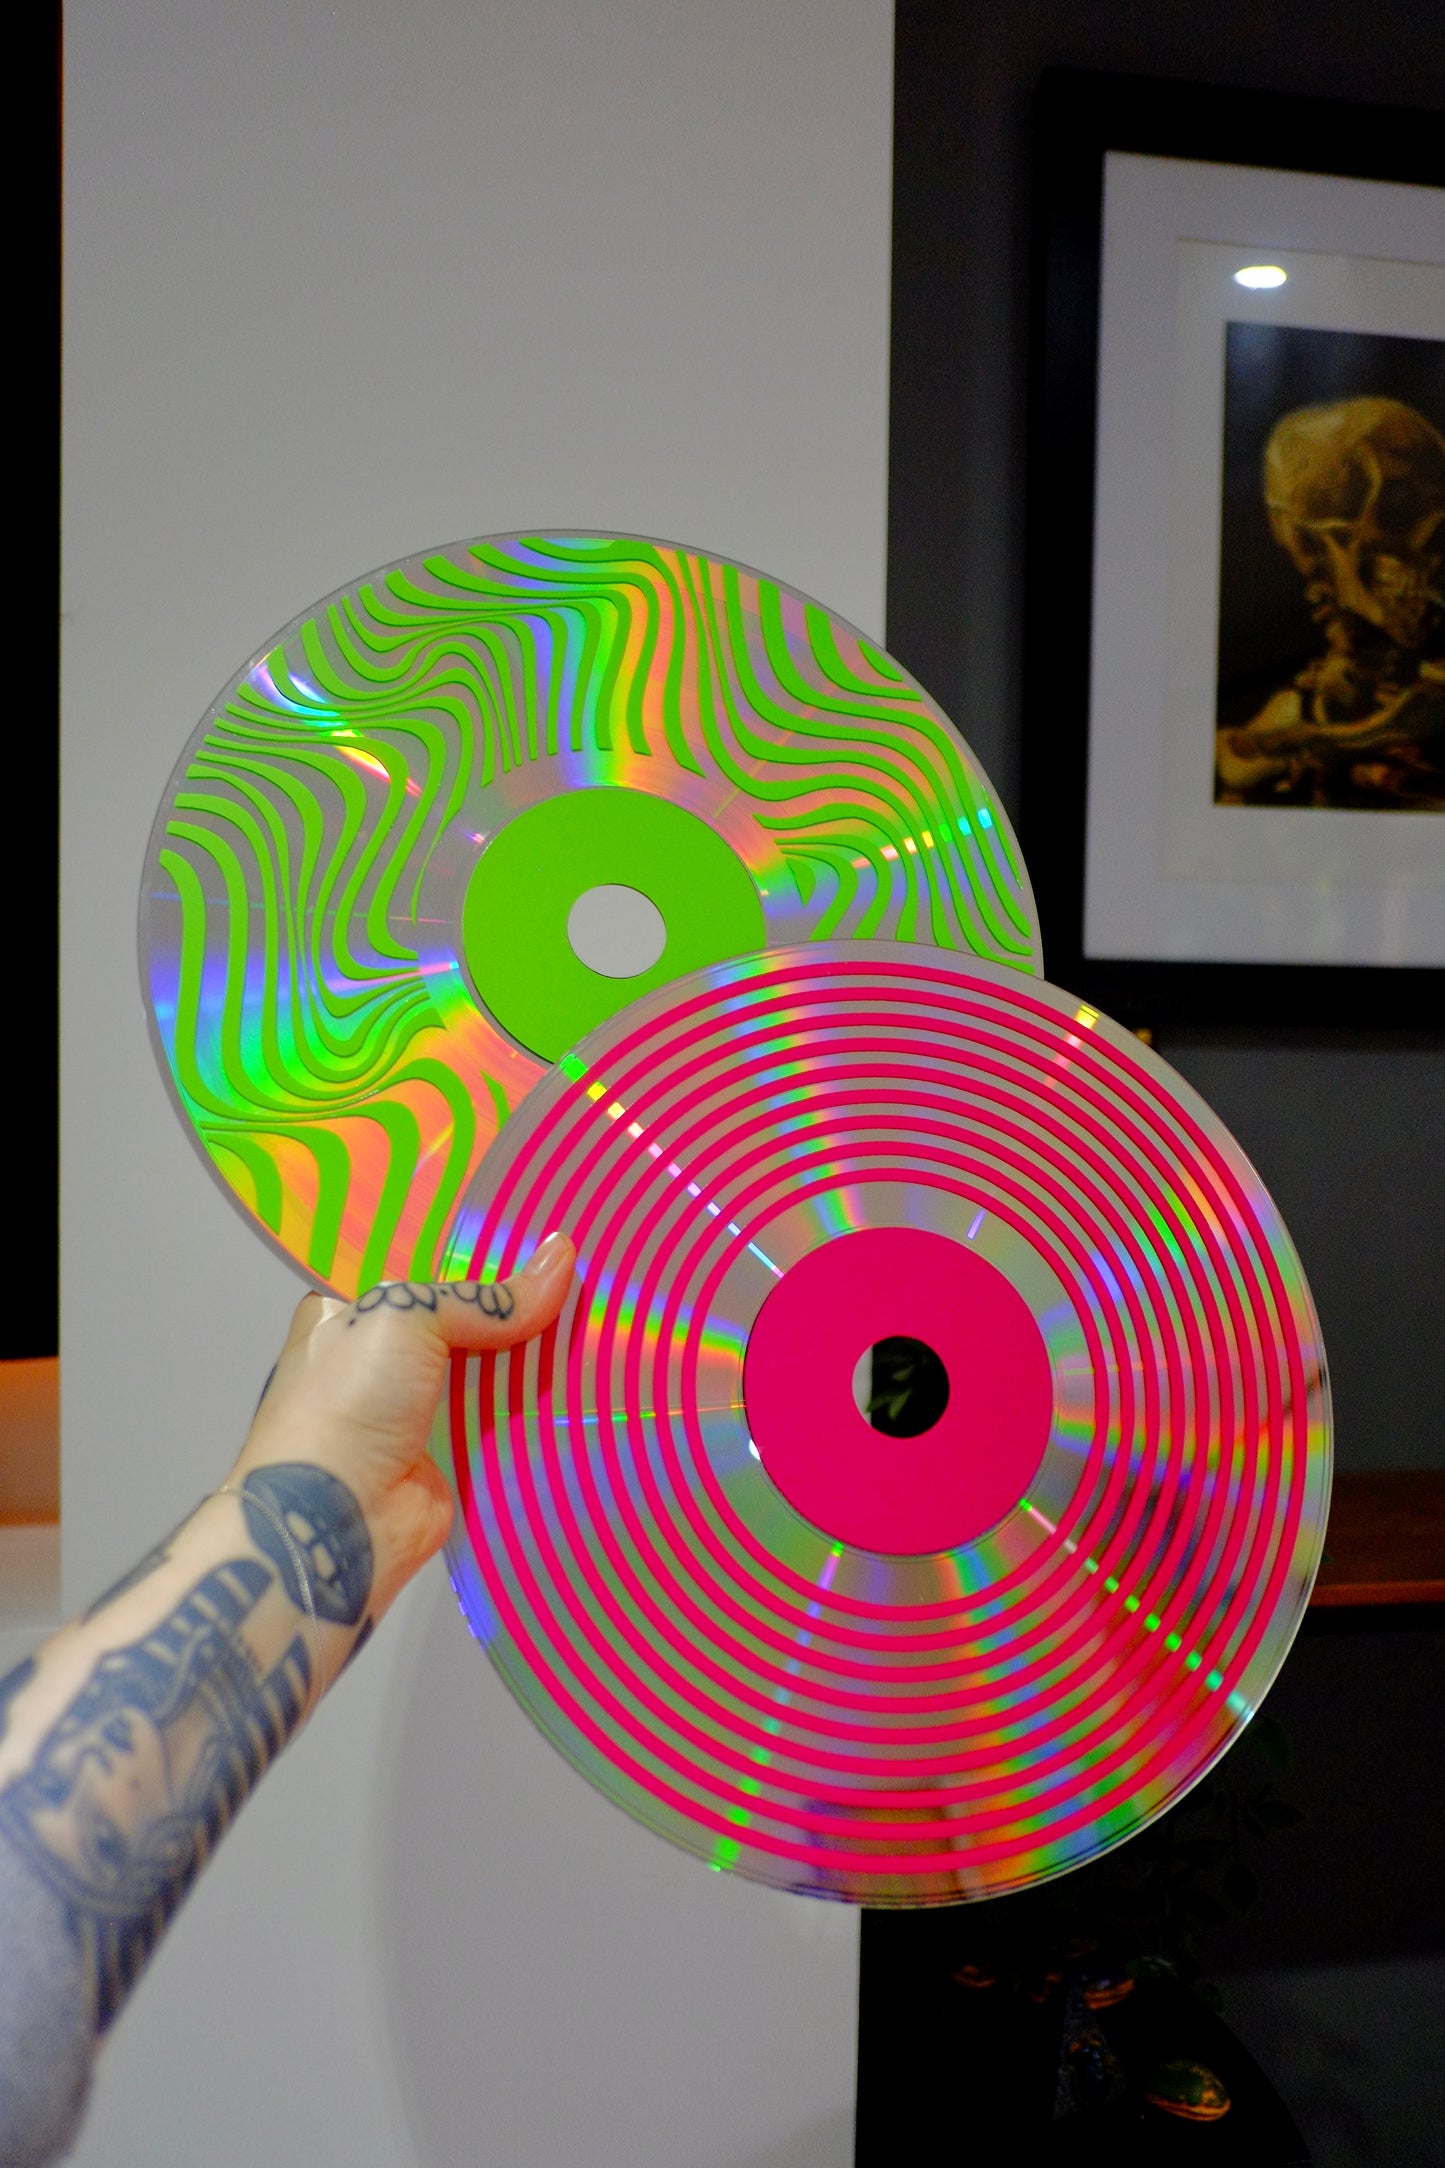 Swirl pattern psychedelic upcycled vintage 12" laser disc home decor